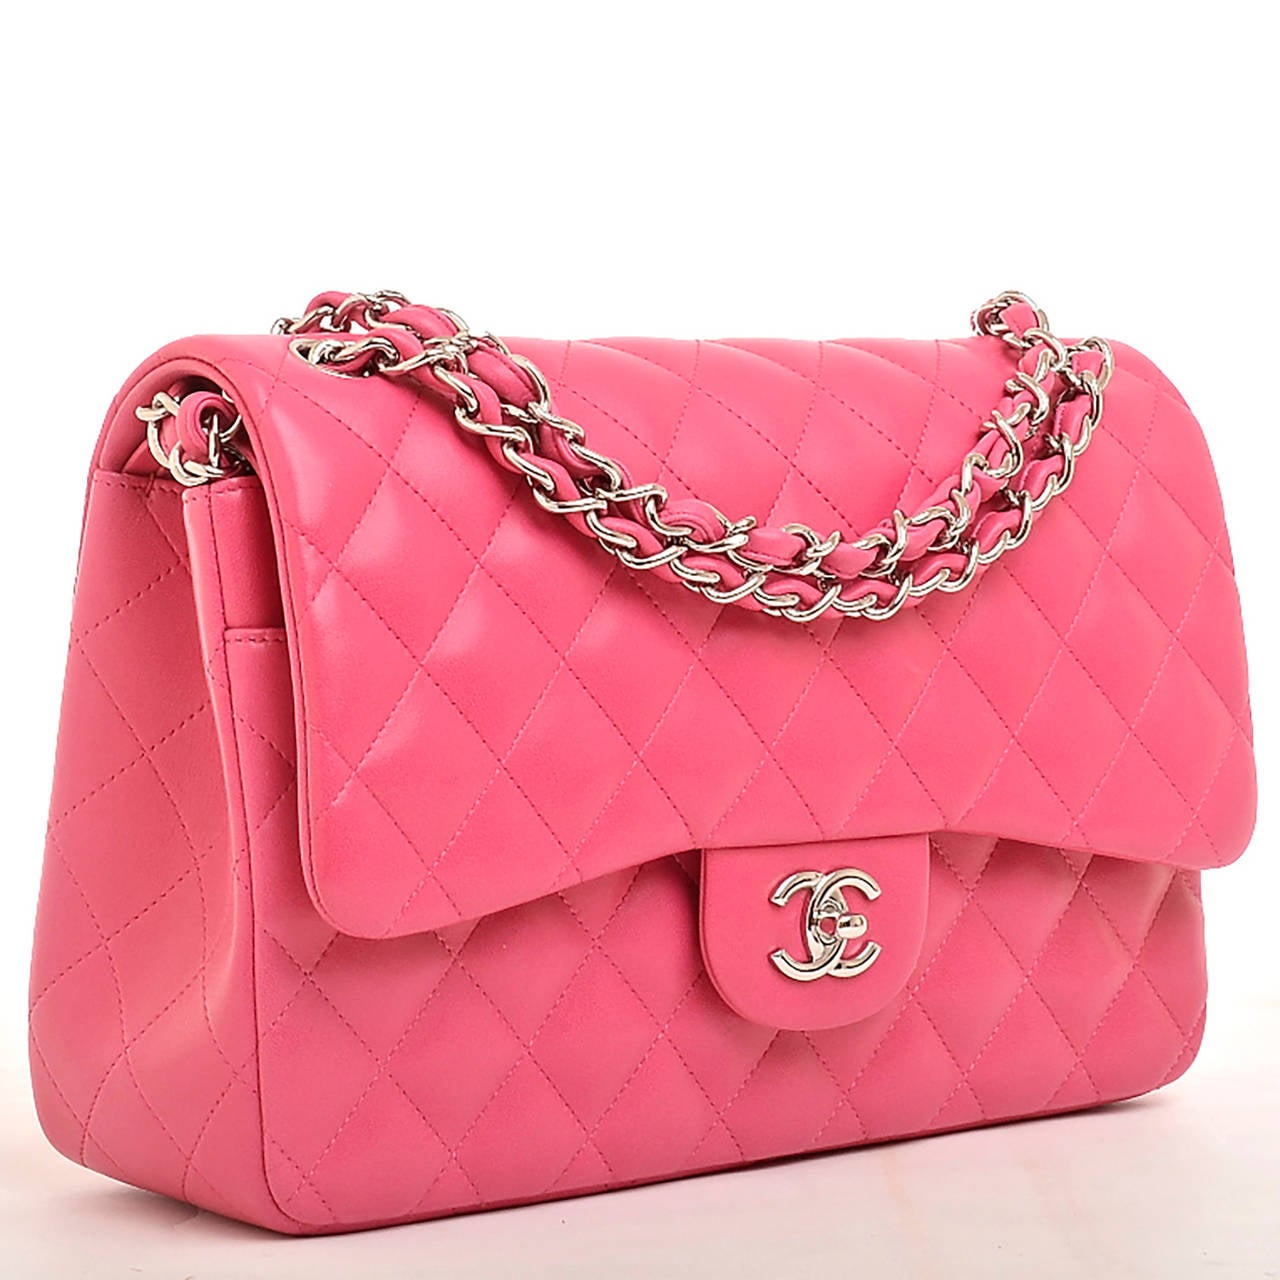 Chanel fuchsia pink Jumbo Classic double flap bag of quilted lambskin with silver tone hardware.

This limited edition Jumbo Classic double flap of fuchsia pink lambskin leather features a front flap with signature CC turnlock closure, half moon